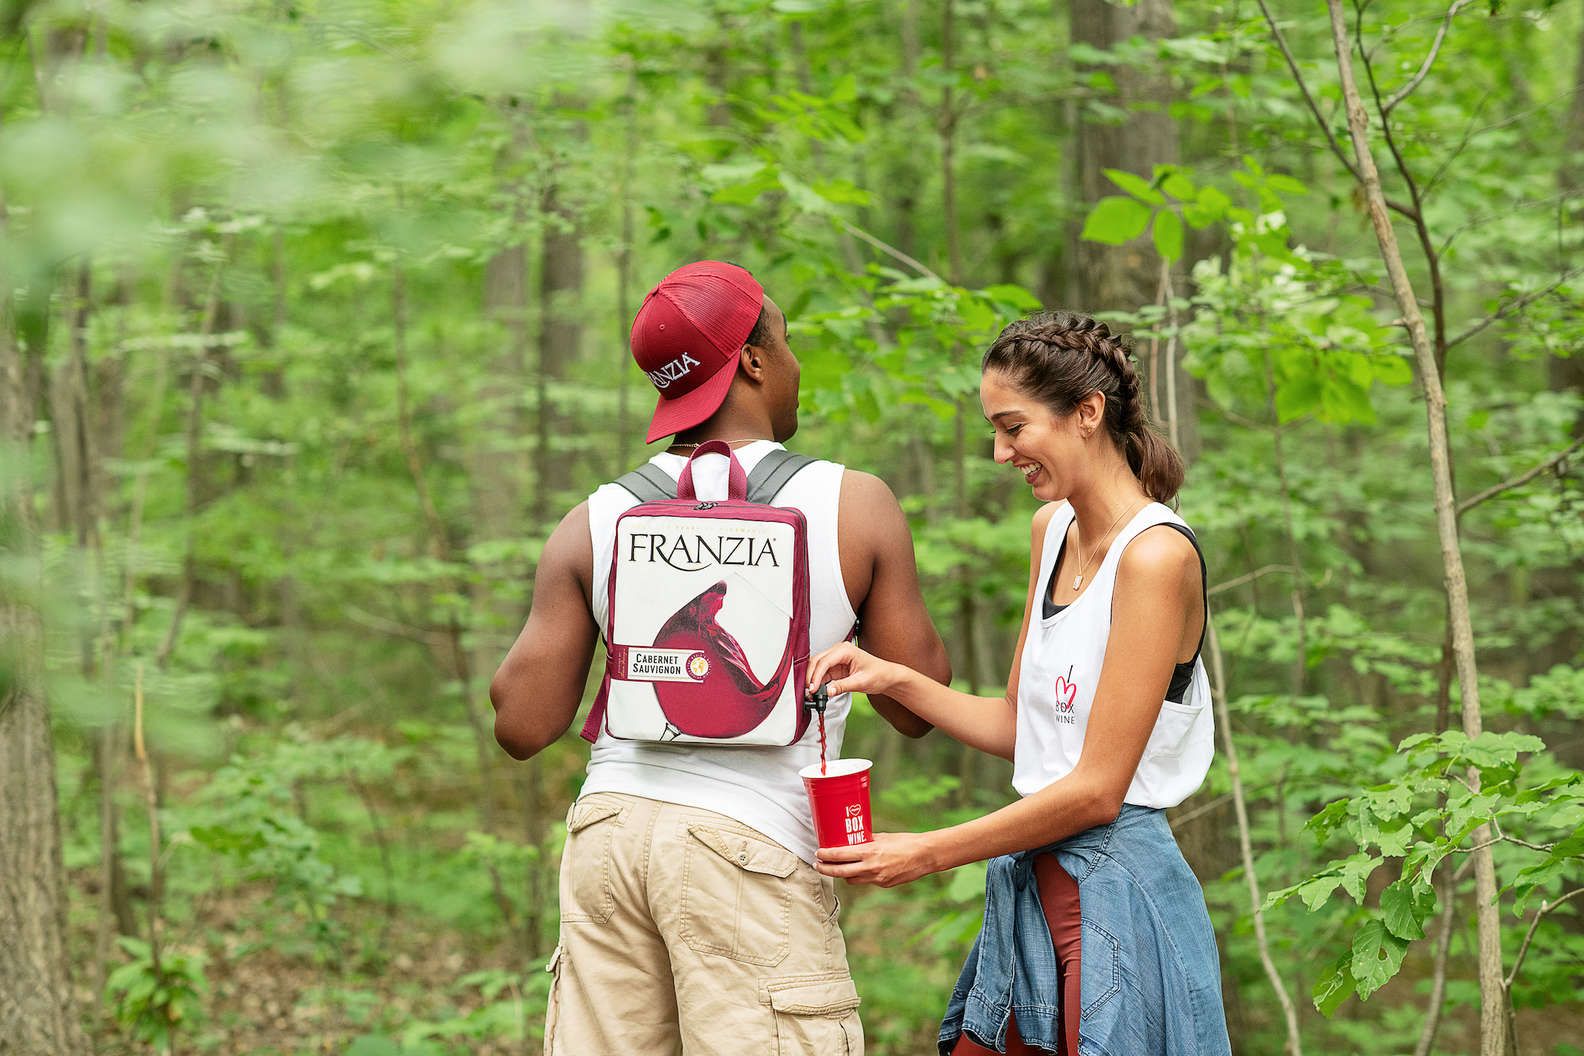 Franzia’s New Line Of Merch Includes A Wine-Dispensing Backpack